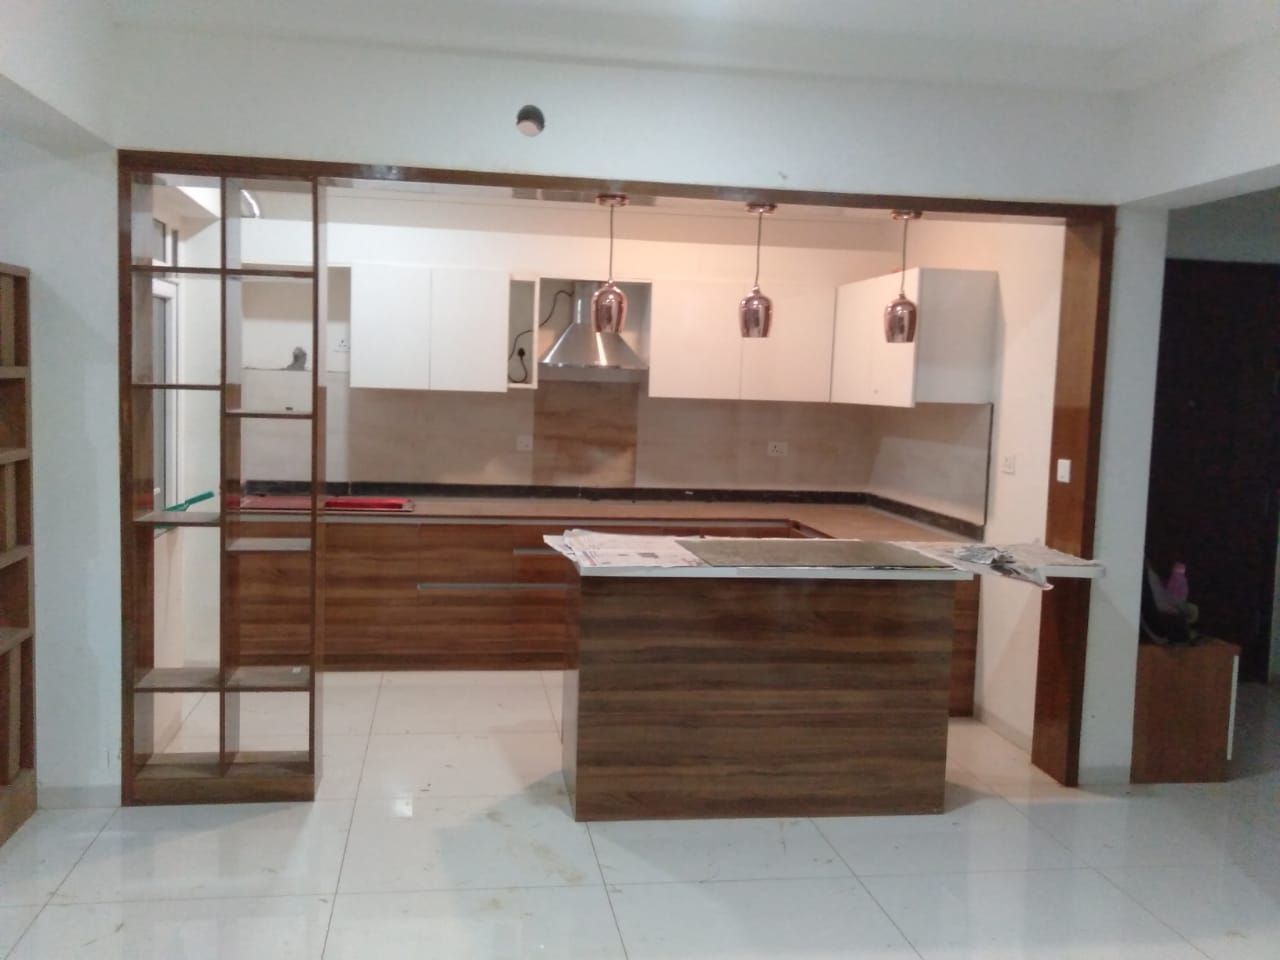 Mr.Unnikrishnan's Residence, Urban Forest, Whitefield, Bangalore, Design Space Design Space Modern kitchen پلائیووڈ Cabinets & shelves